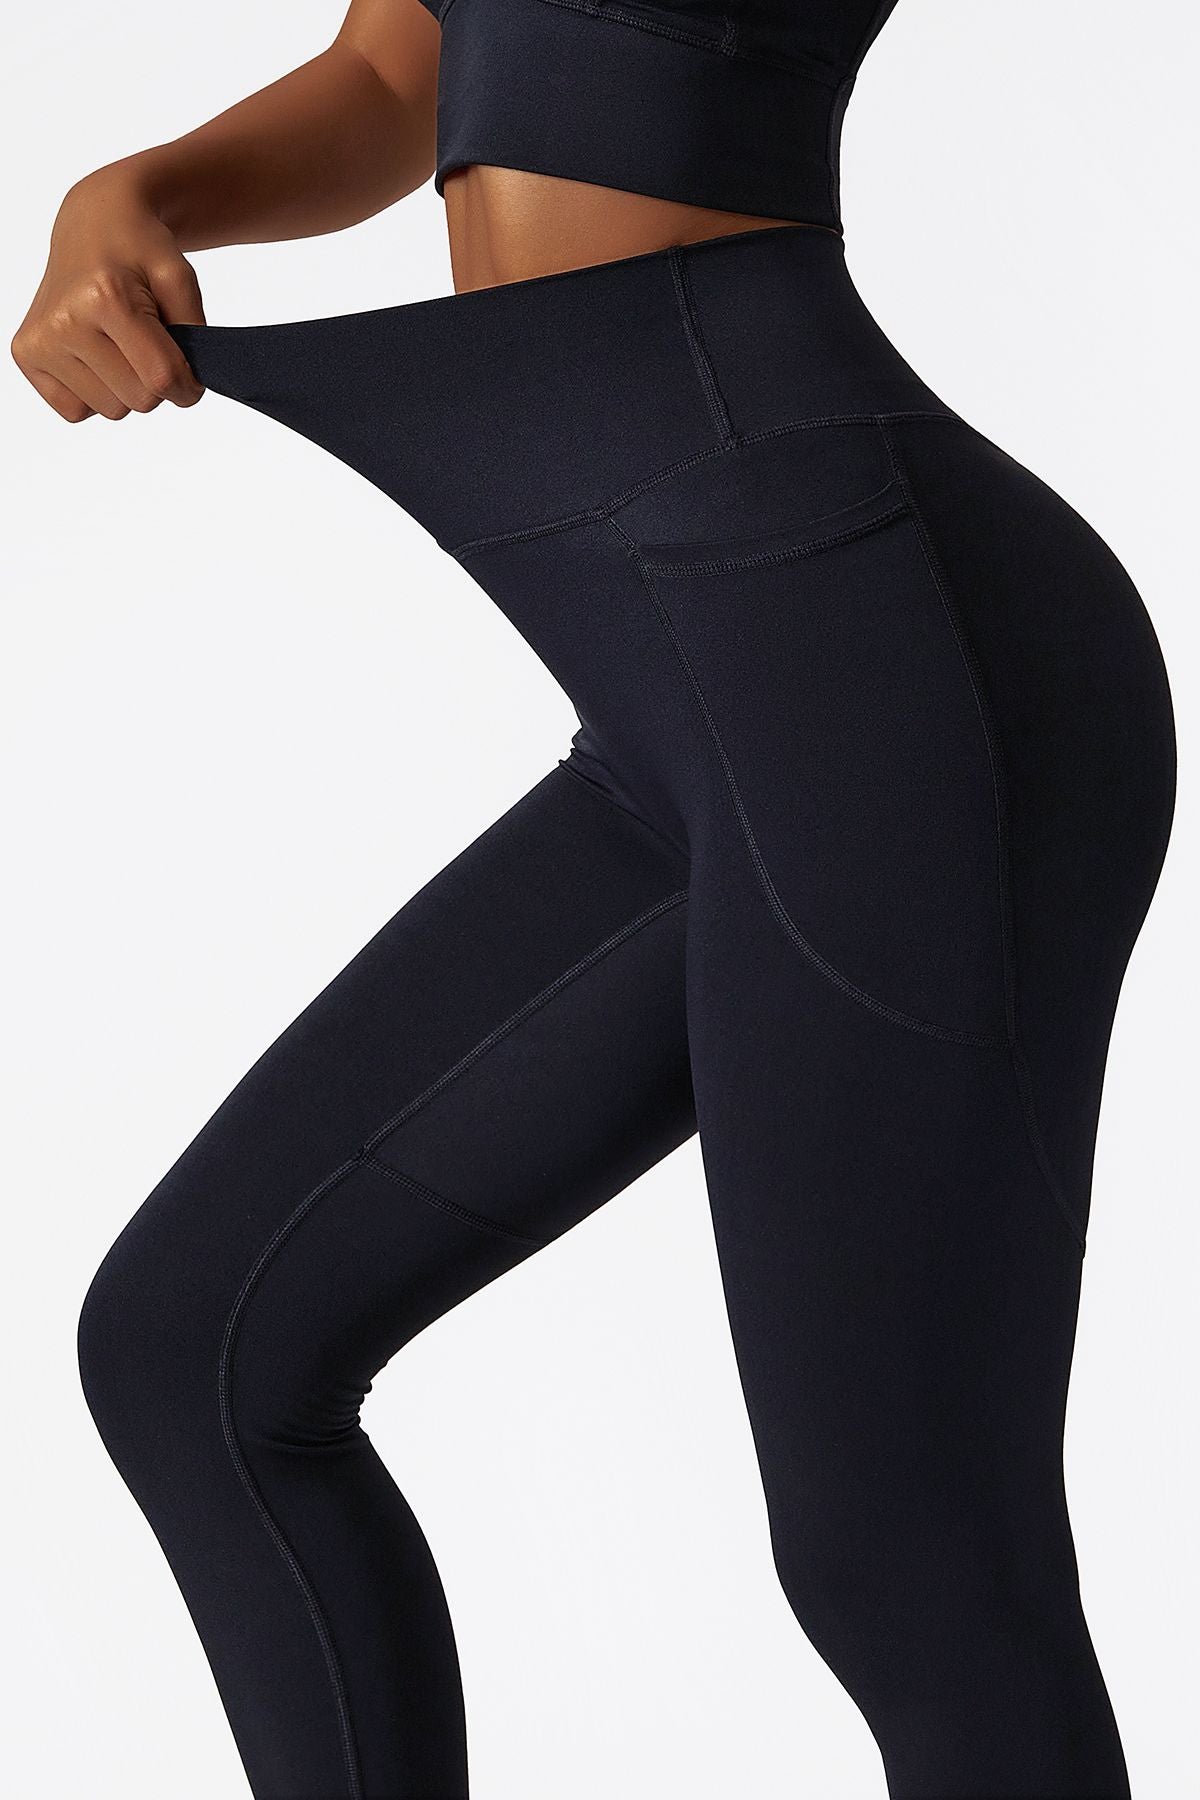 1pc Yoga Leggings With Pocket, High Waist Compression Running Tights Workout  Athletic Pants Colanti